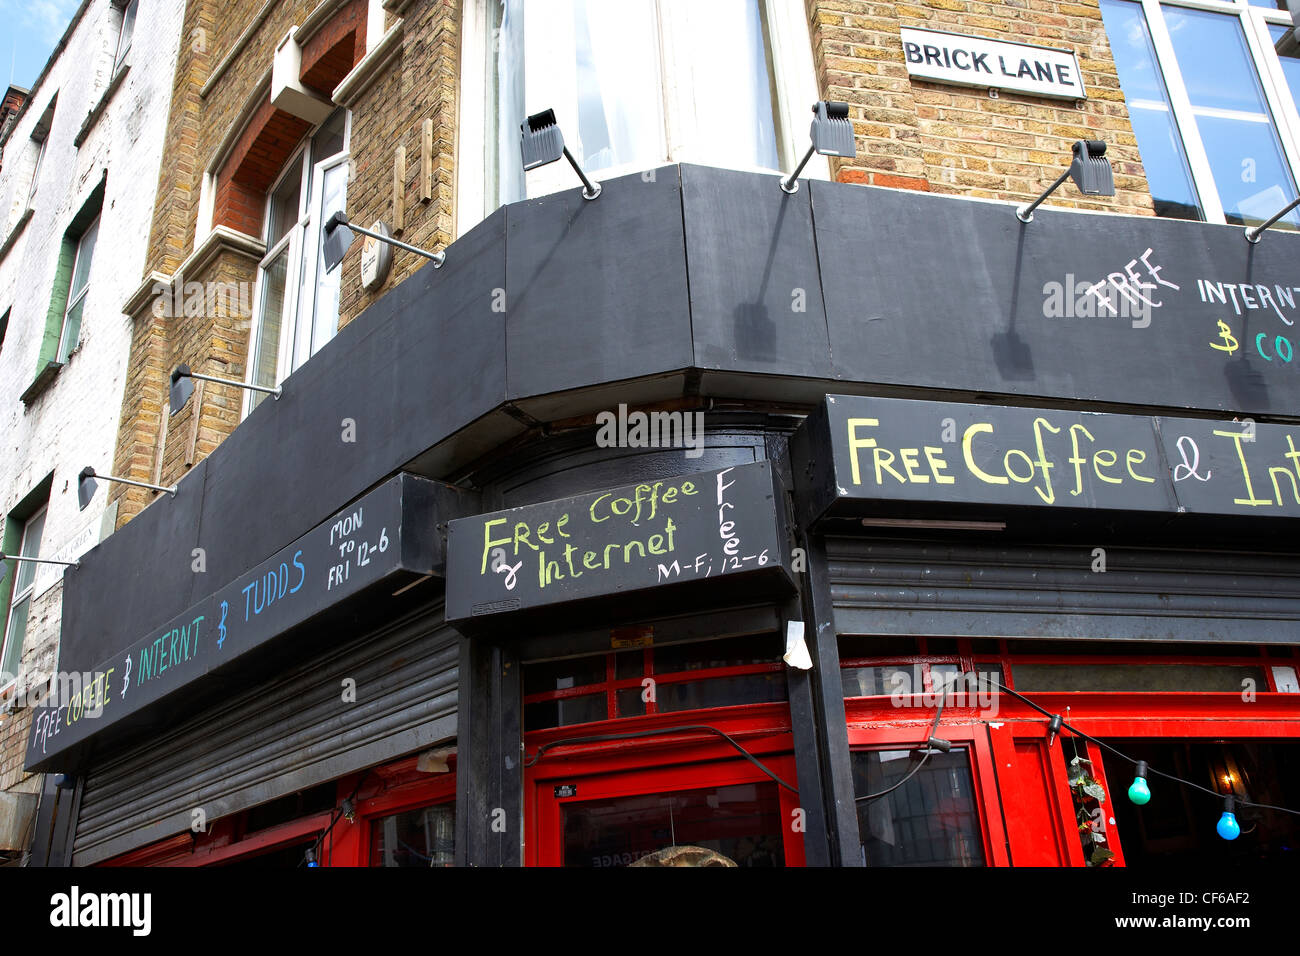 Exterior view of a coffee house in Brick Lane. Stock Photo